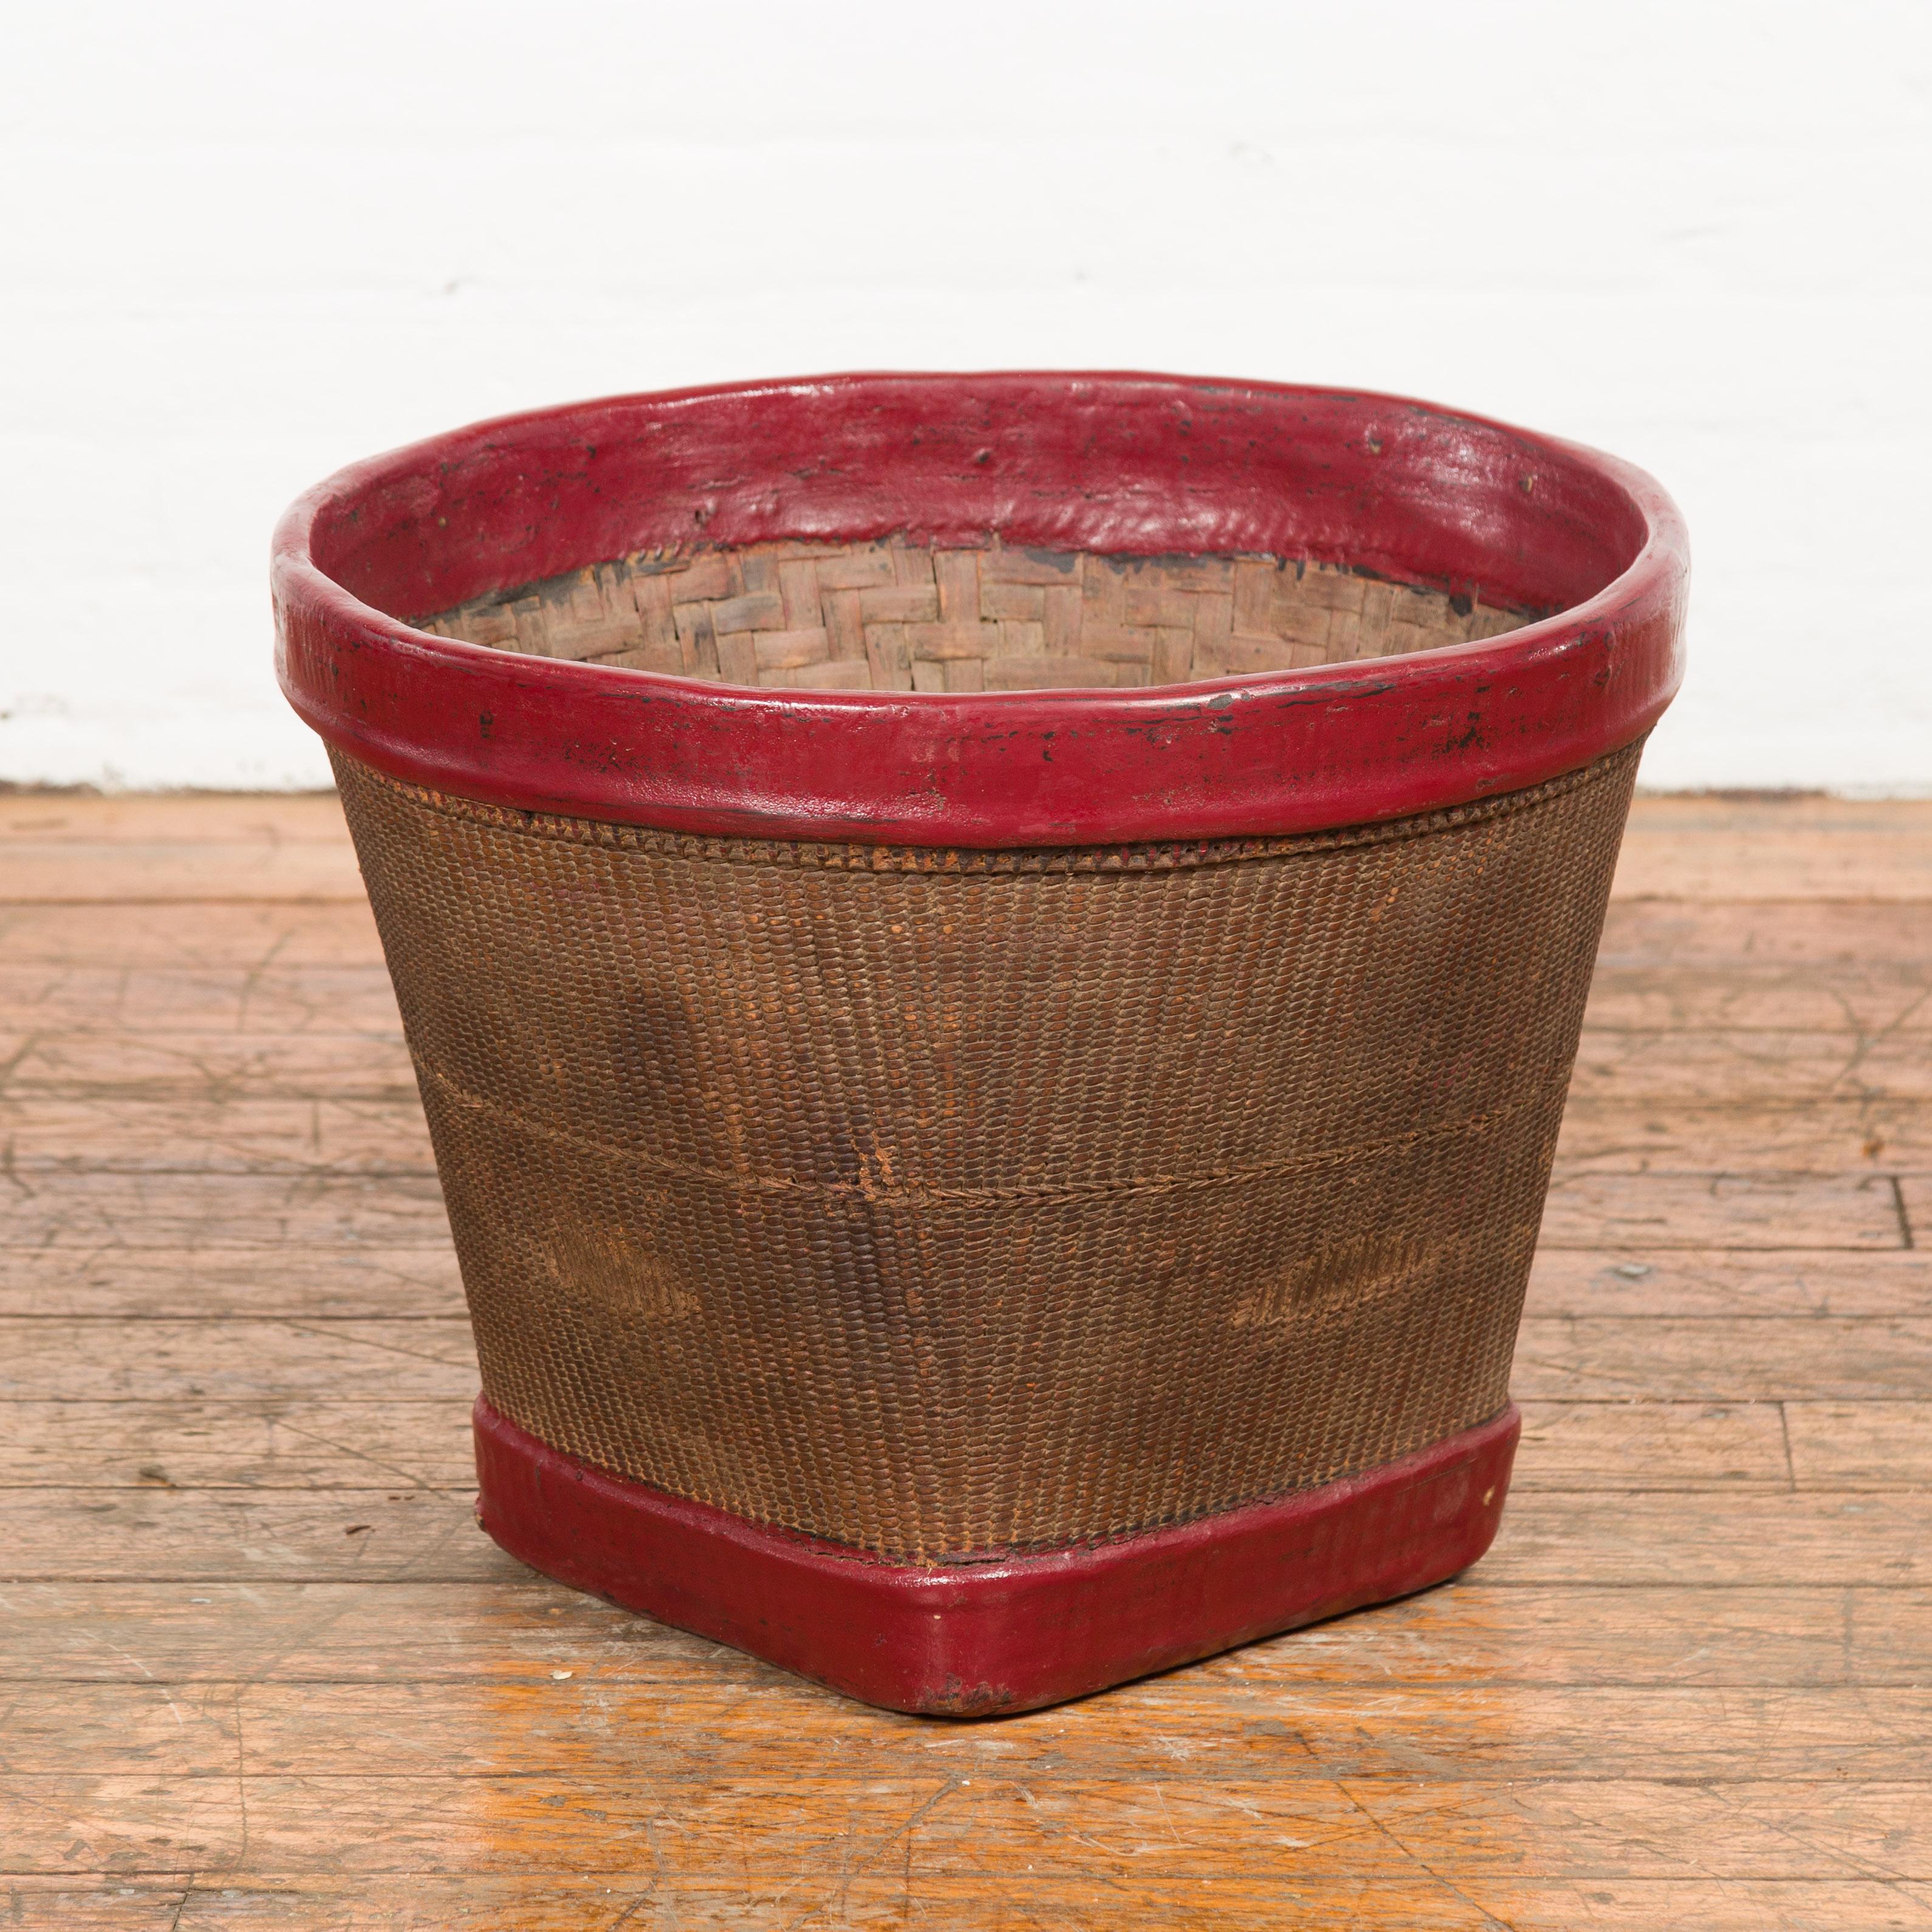 An antique Thai hand-woven rattan grain basket from the 19th century, with red lacquered rim, tapering lines and rustic character. Created in Thailand during the 19th century, this rice basket charms us with its rustic appeal and contrasting colors.